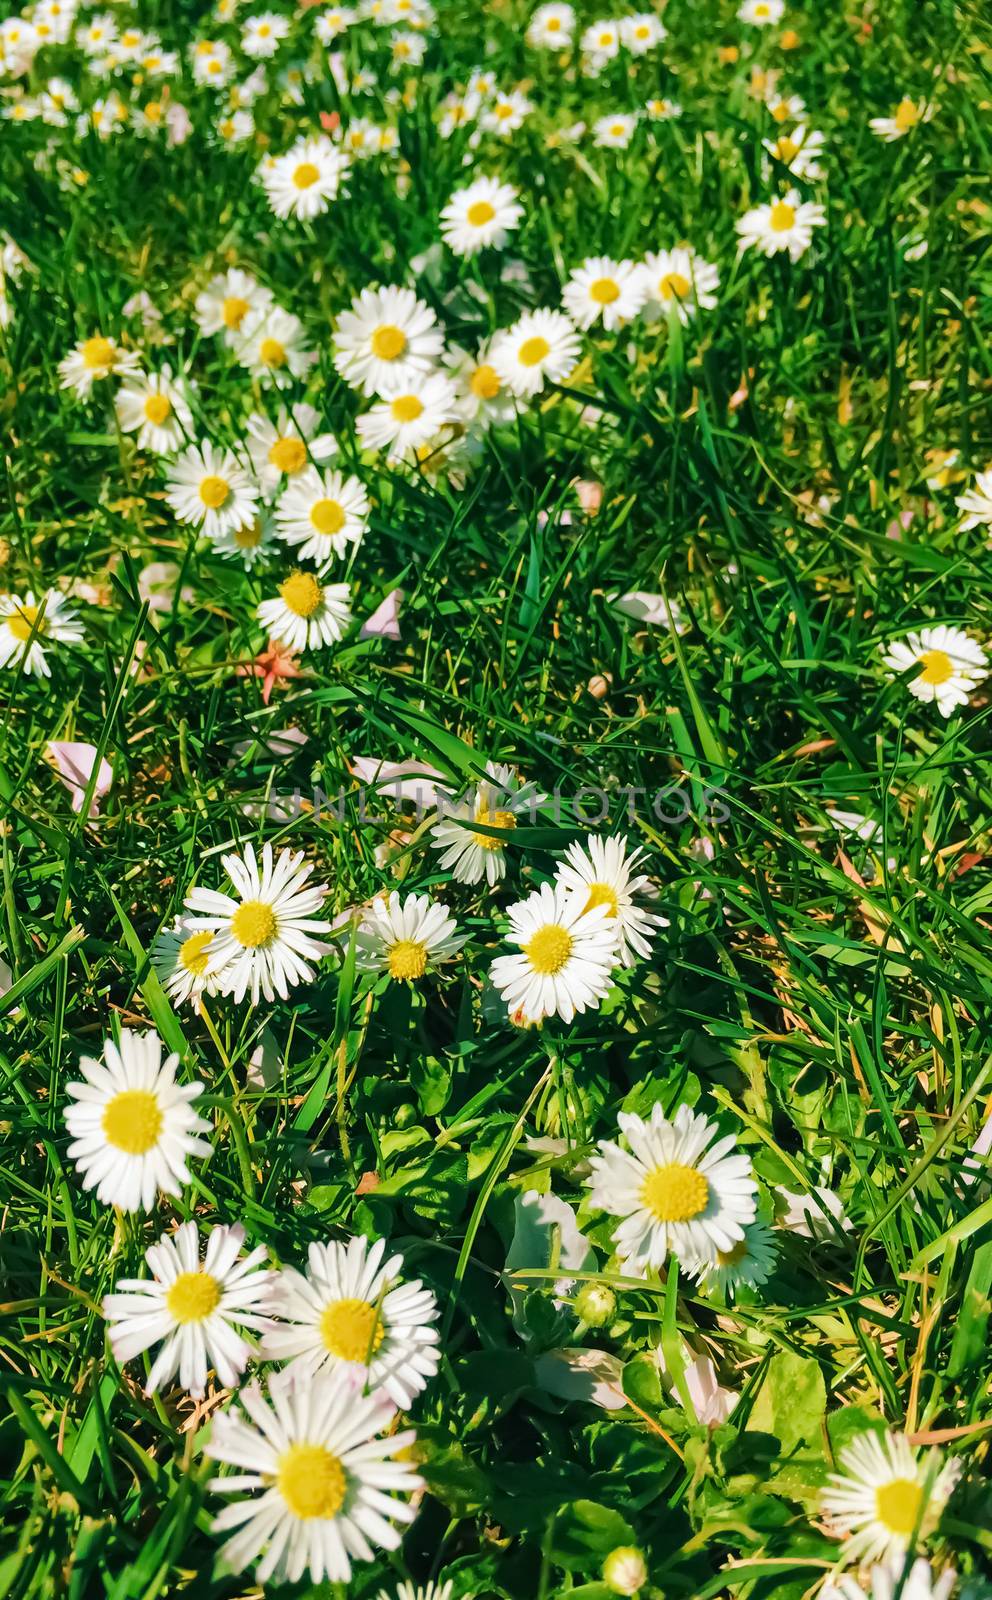 Daisy flowers and green grass in spring, nature and outdoors by Anneleven